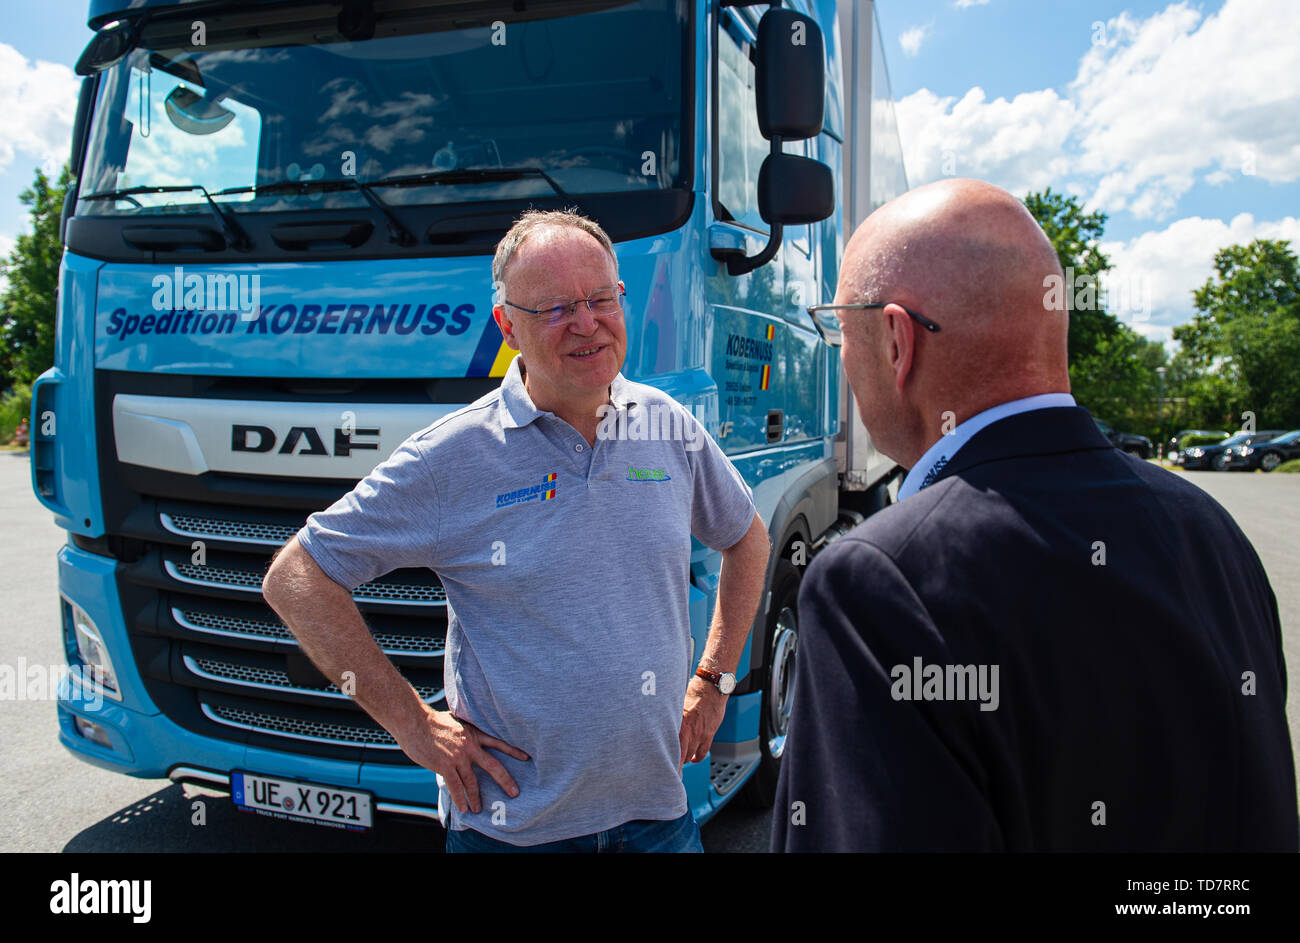 Uelzen, Germany. 13th June, 2019. Stephan Weil (SPD, l), Prime Minister of Lower Saxony, talks to Hubertus Kobernuss, owner and Managing Director of Spedition Kobernuss. In order to gain an insight into different working environments, Prime Minister Stephan Weil works several times a year for several hours in companies, authorities, institutions and social institutions throughout Lower Saxony. Credit: Philipp Schulze/dpa/Alamy Live News Stock Photo